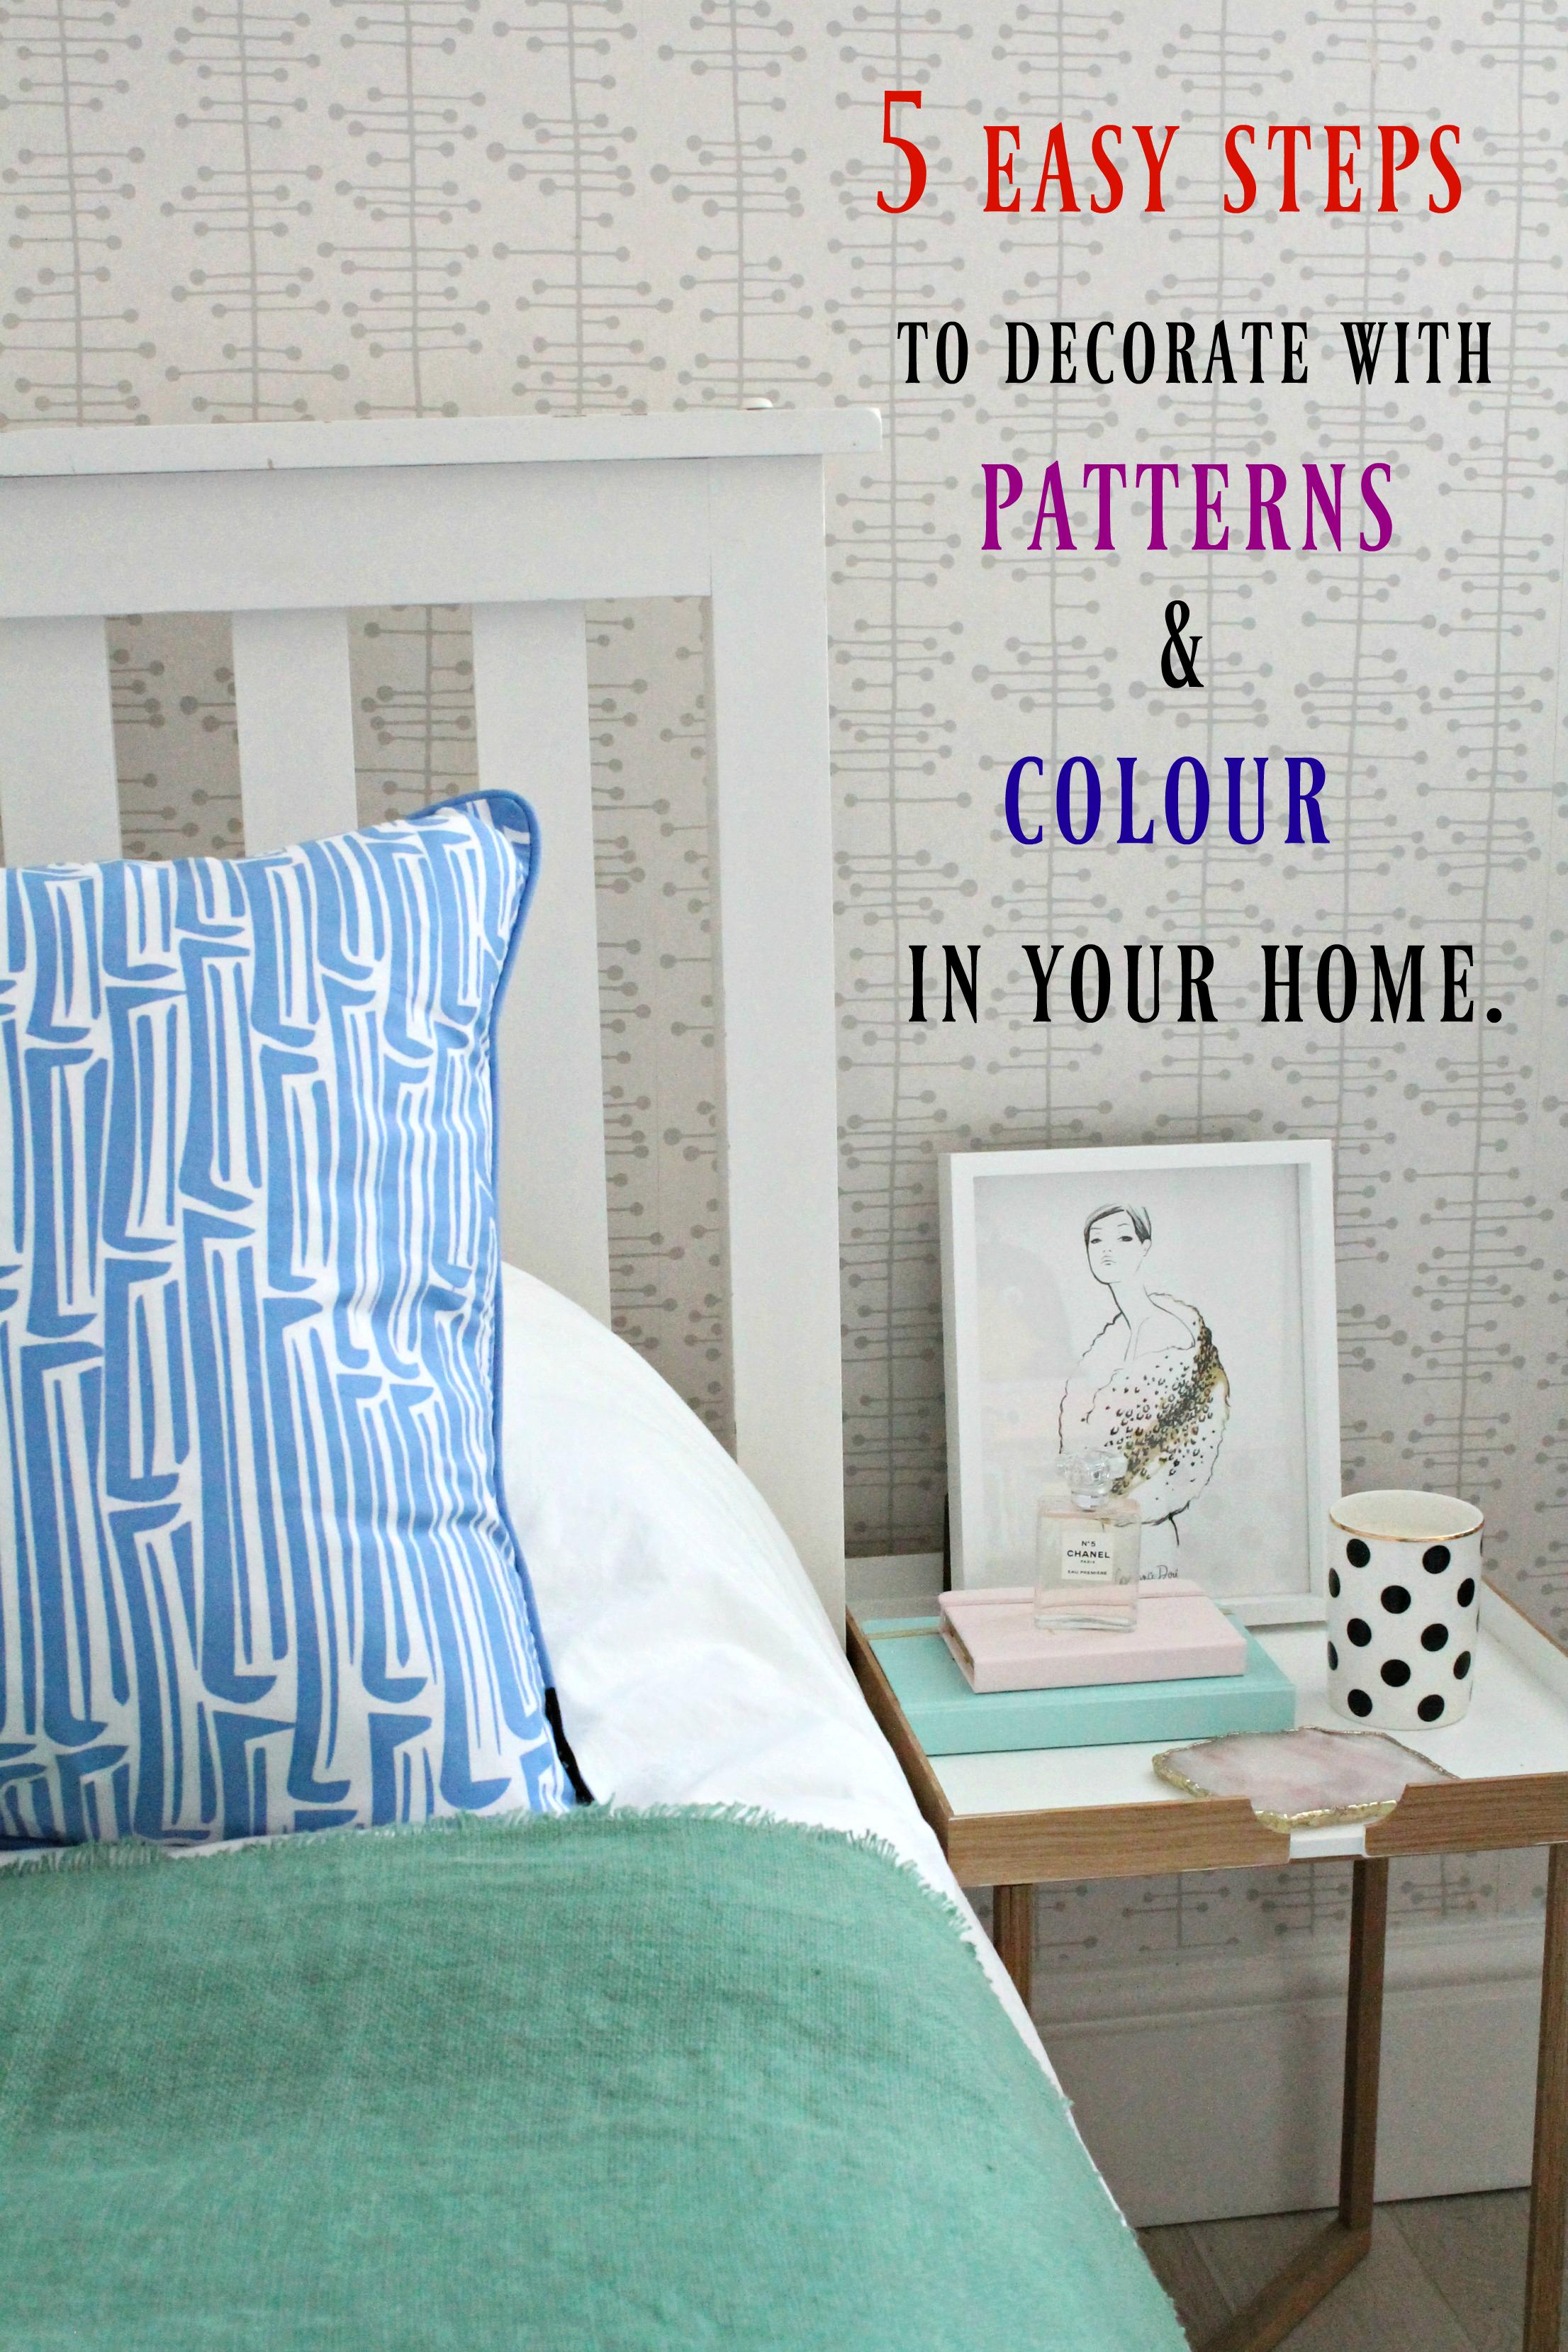 decorate-patterns-and-colour-in-your-home-in-5-steps-little-big-bell